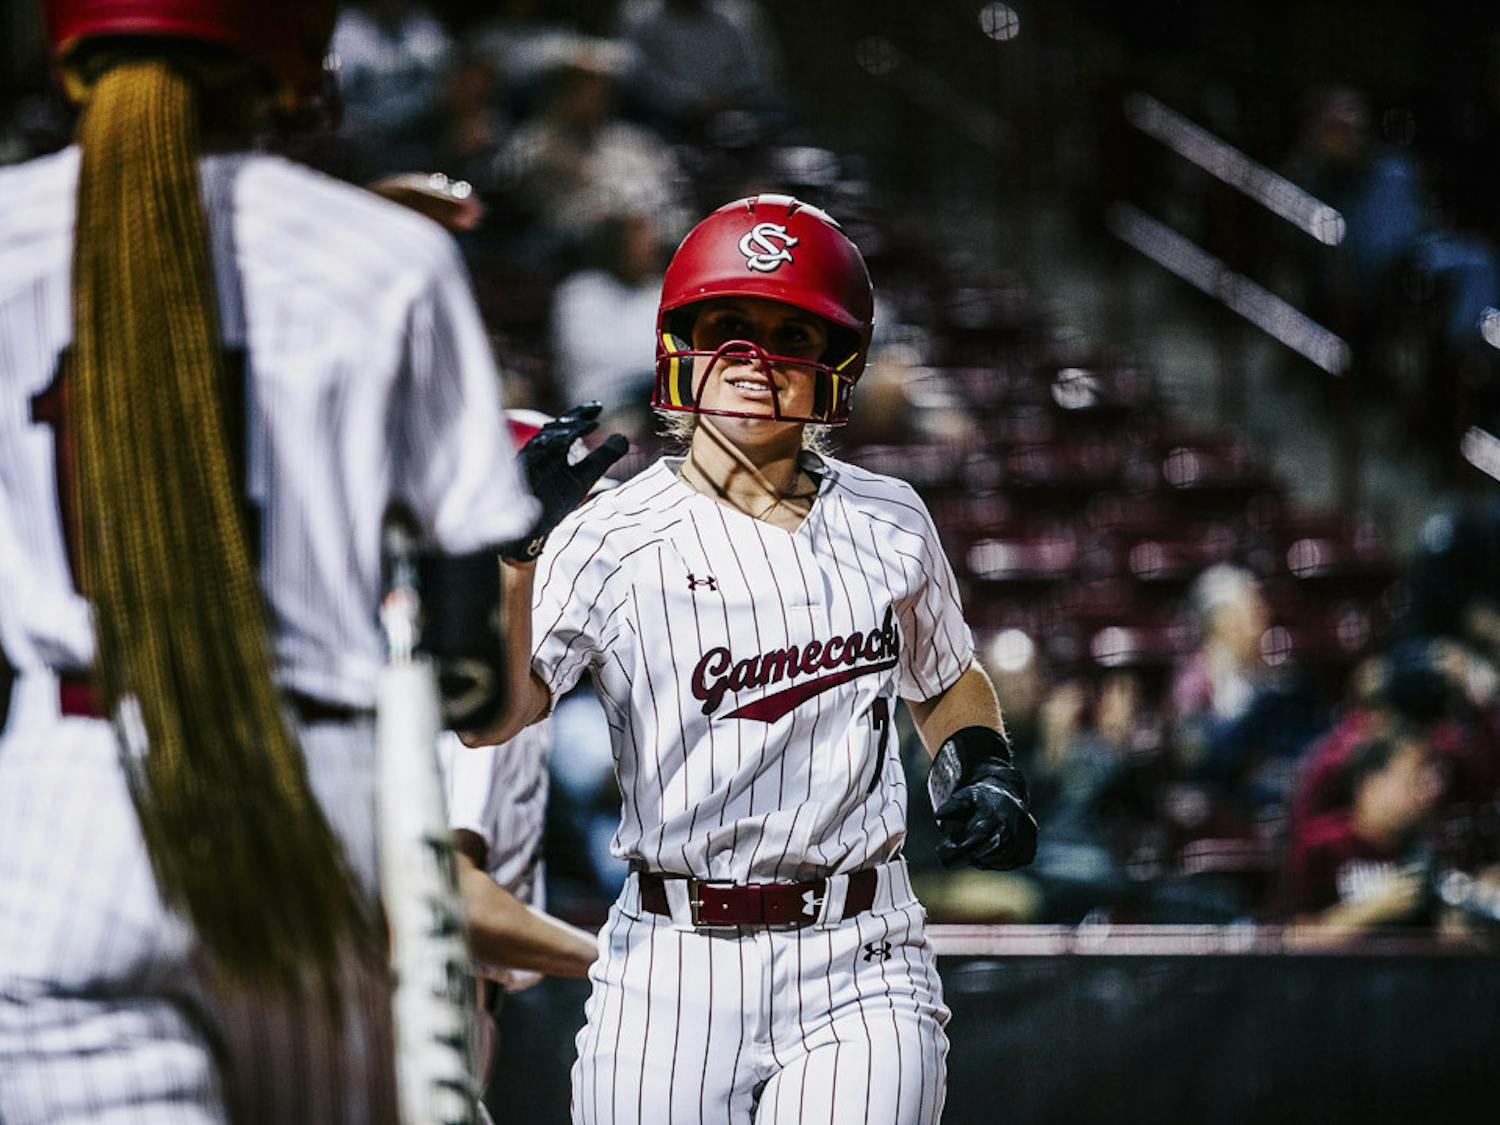 Sophomore catcher/infielder Giulia Desiderio greets her teammates after she scores the first run in the game between South Carolina and the College of Charleston at Carolina Softball Stadium at Beckham Field on February 15, 2023. The Gamecocks beat the Cougars 8-0.&nbsp;